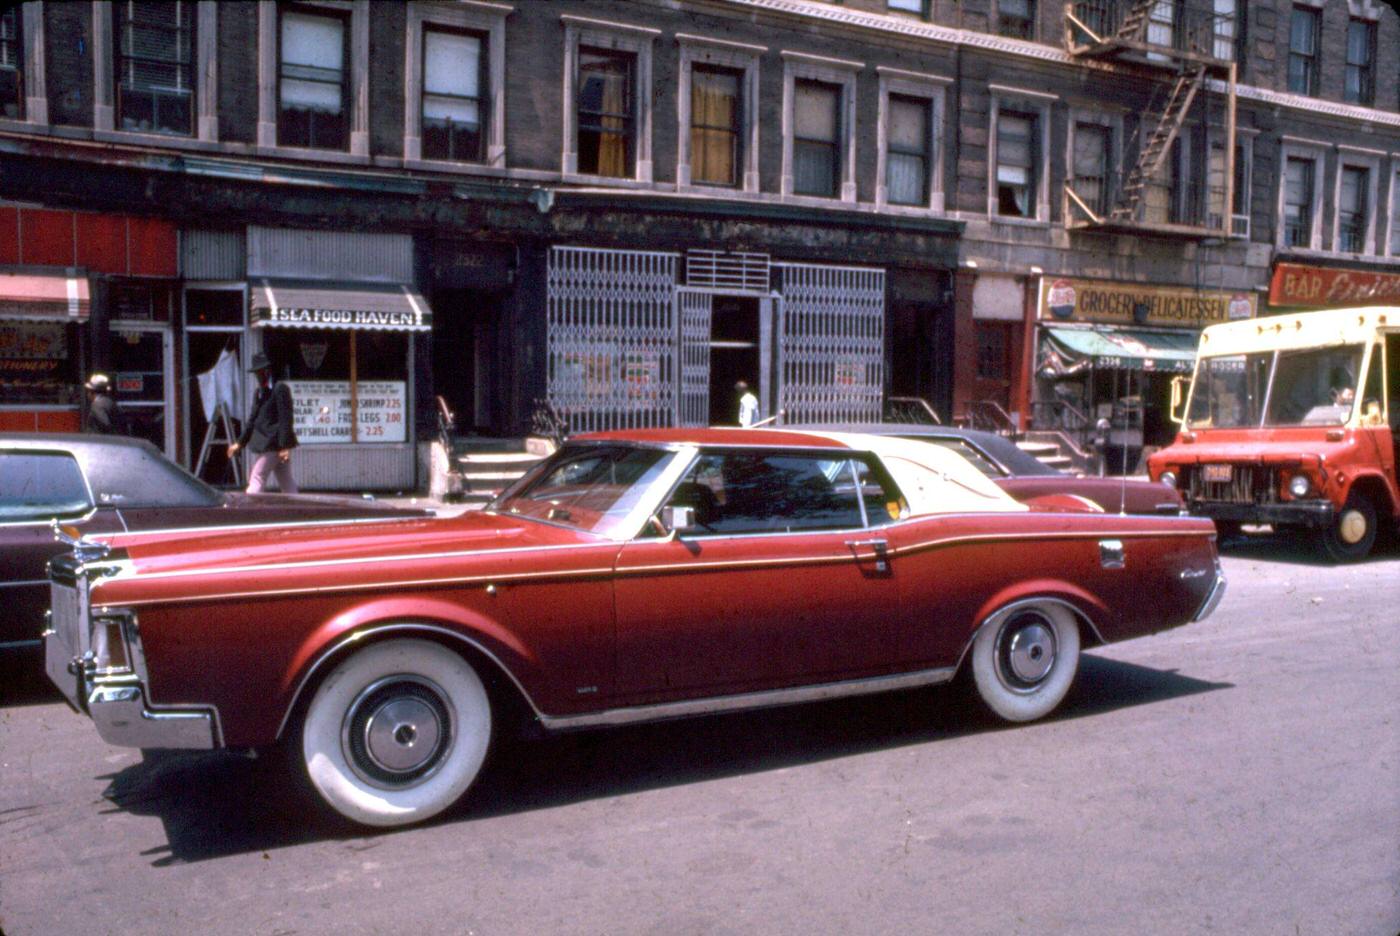 Customized Lincoln-Continental Mark Iii 'Pimpmobile' On A Street In Harlem, Manhattan, 1970S.